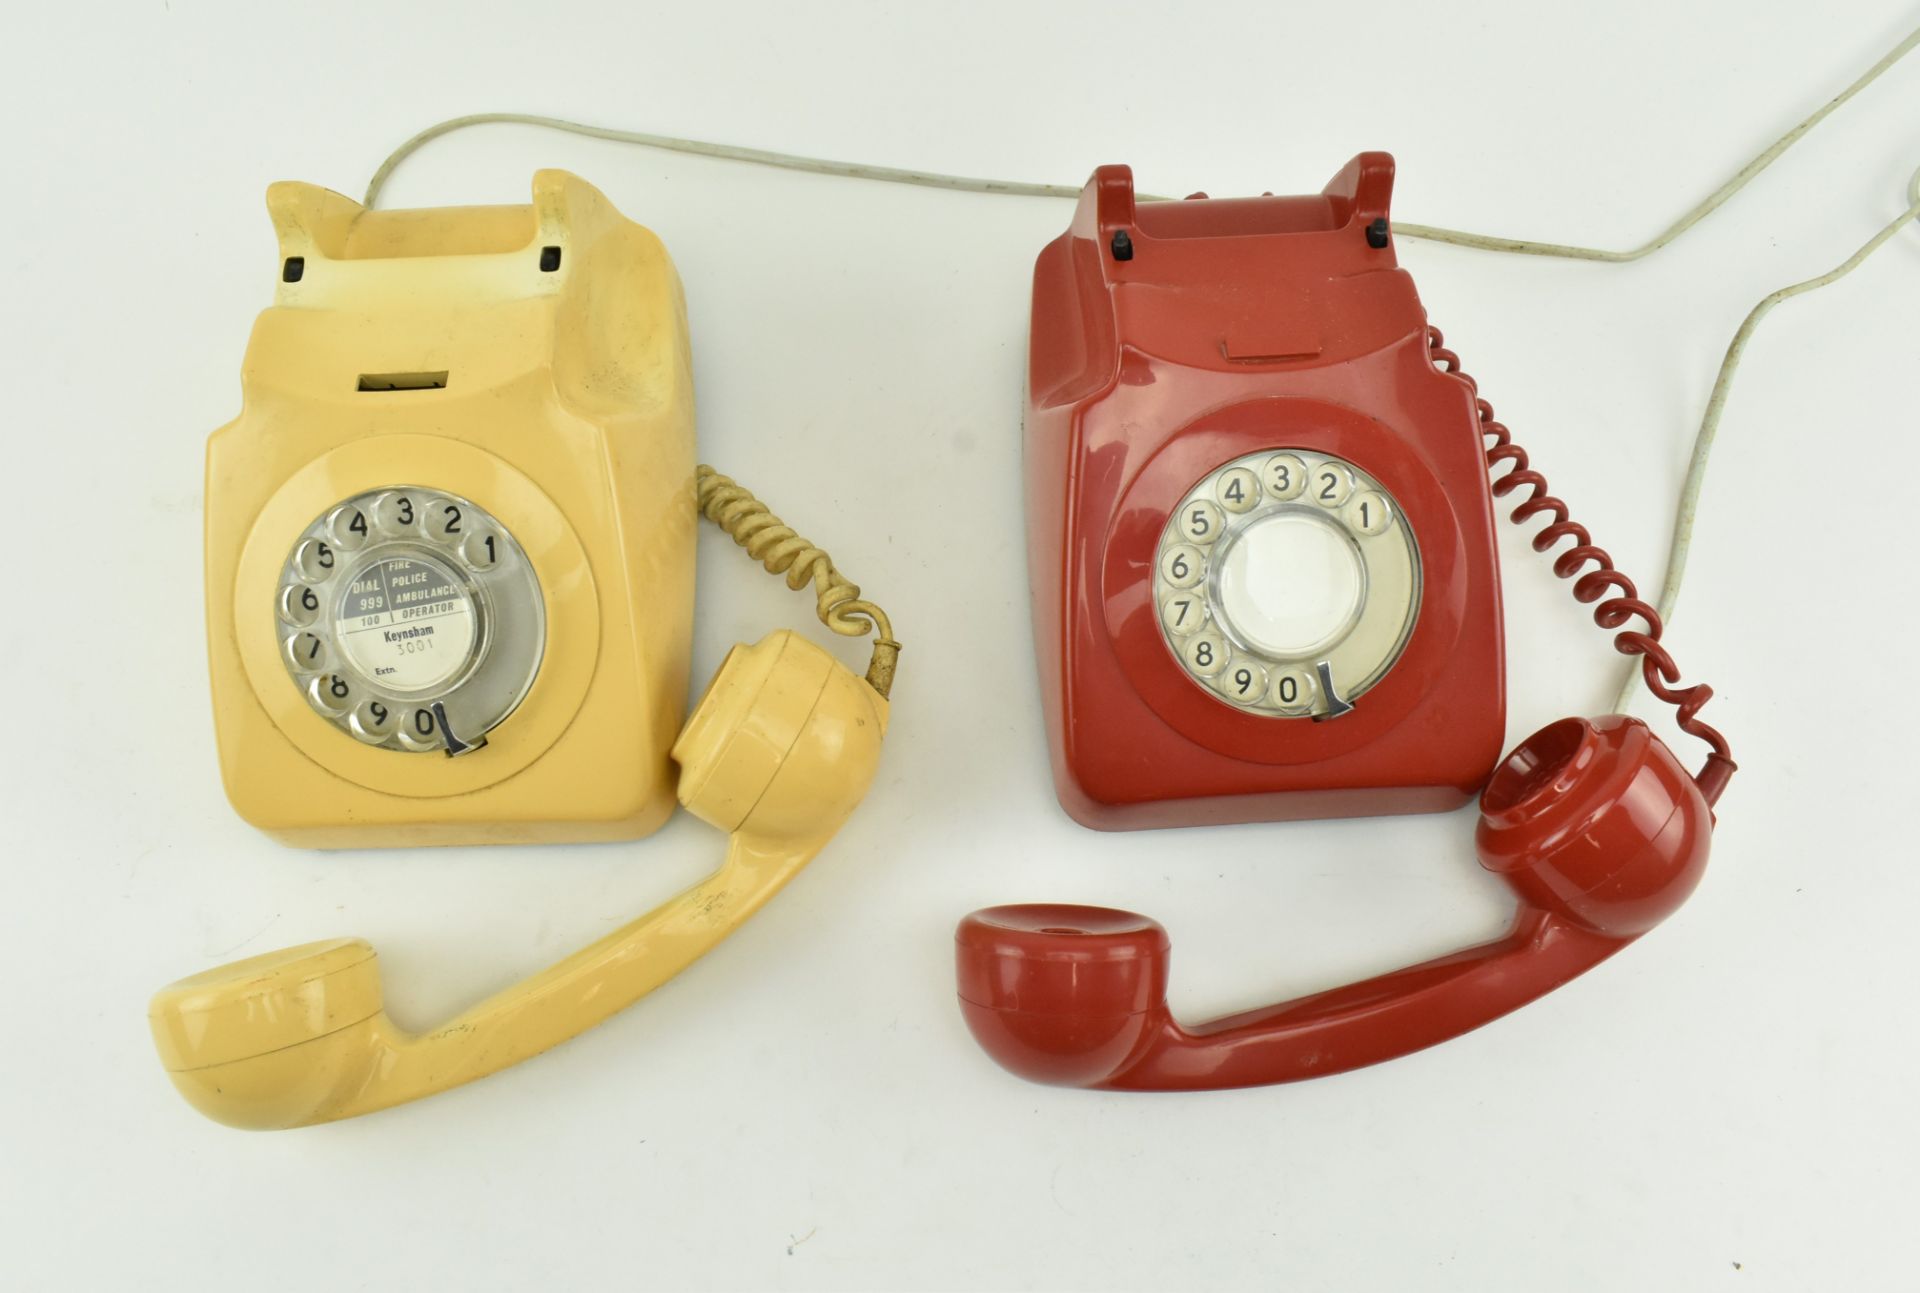 TWO VINTAGE G. P. O. ROTARY DIAL TELEPHONES, ONE RED ONE CREAM - Image 2 of 7